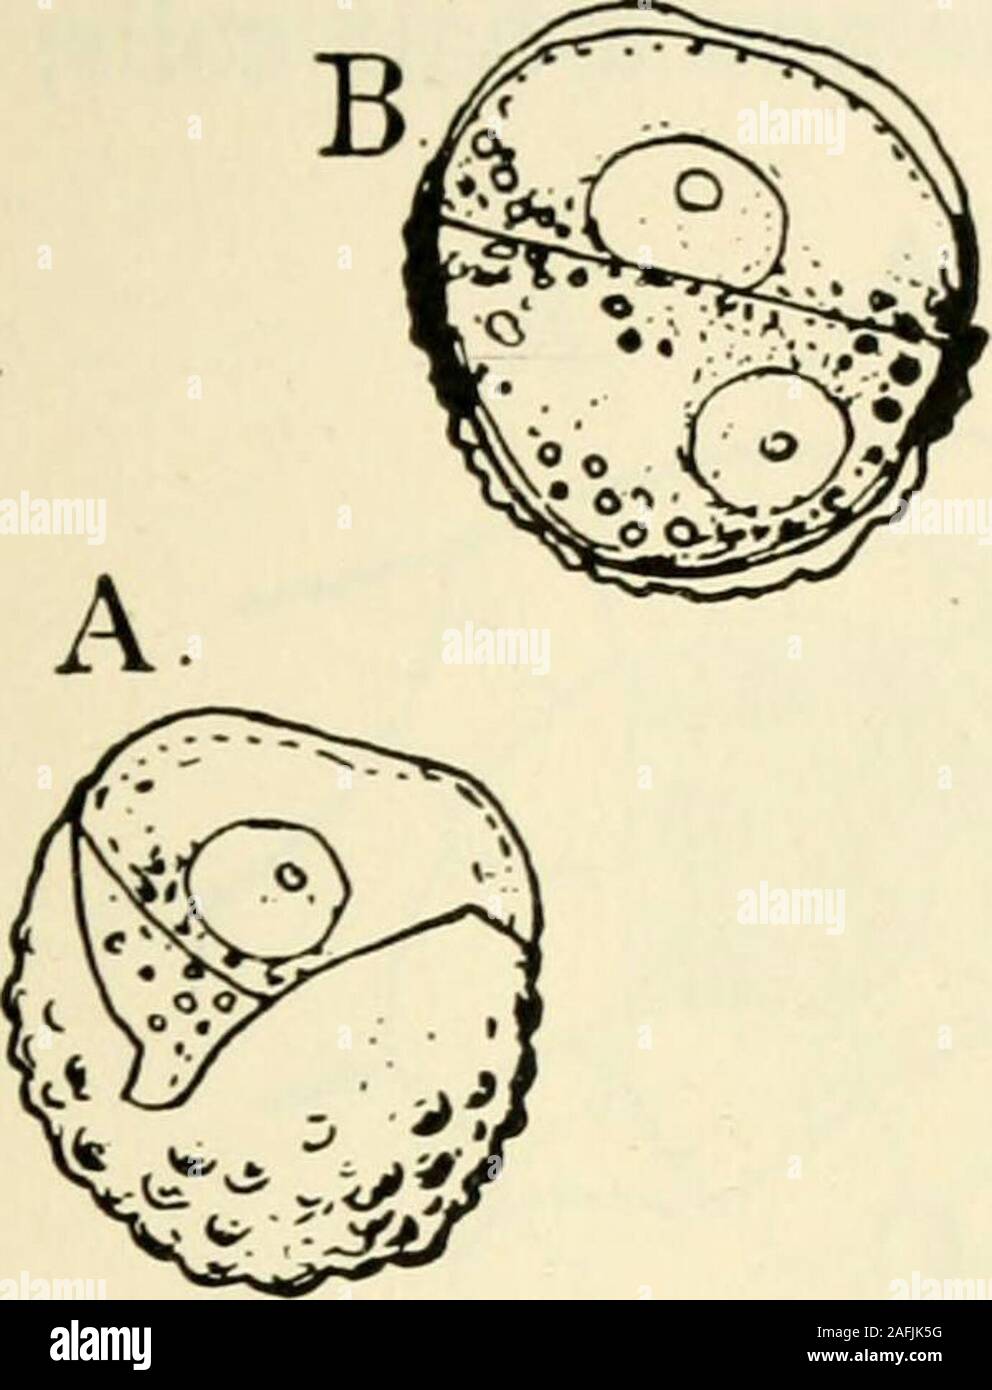 . The structure and development of mosses and ferns (Archegoniatae). In B. lunaria, according to Hofmeister ((i), p.308), the archegonia are mostly formed upon the ventralsurface. A section of the prothallium shows that the superficial tis-sues are composed of relatively transparent cells, while the innertissue, especially toward the ventral side of the thallus, has verydense contents, there being an oily substance present, as well as vu PTERIDOPHYTA—FILICINE^—OPHIOGLOSSACEJE 239 granular matter. In these cells is found an enckjphytic fungus,which probably acts as a mycorhiza. Multicellular ha Stock Photo